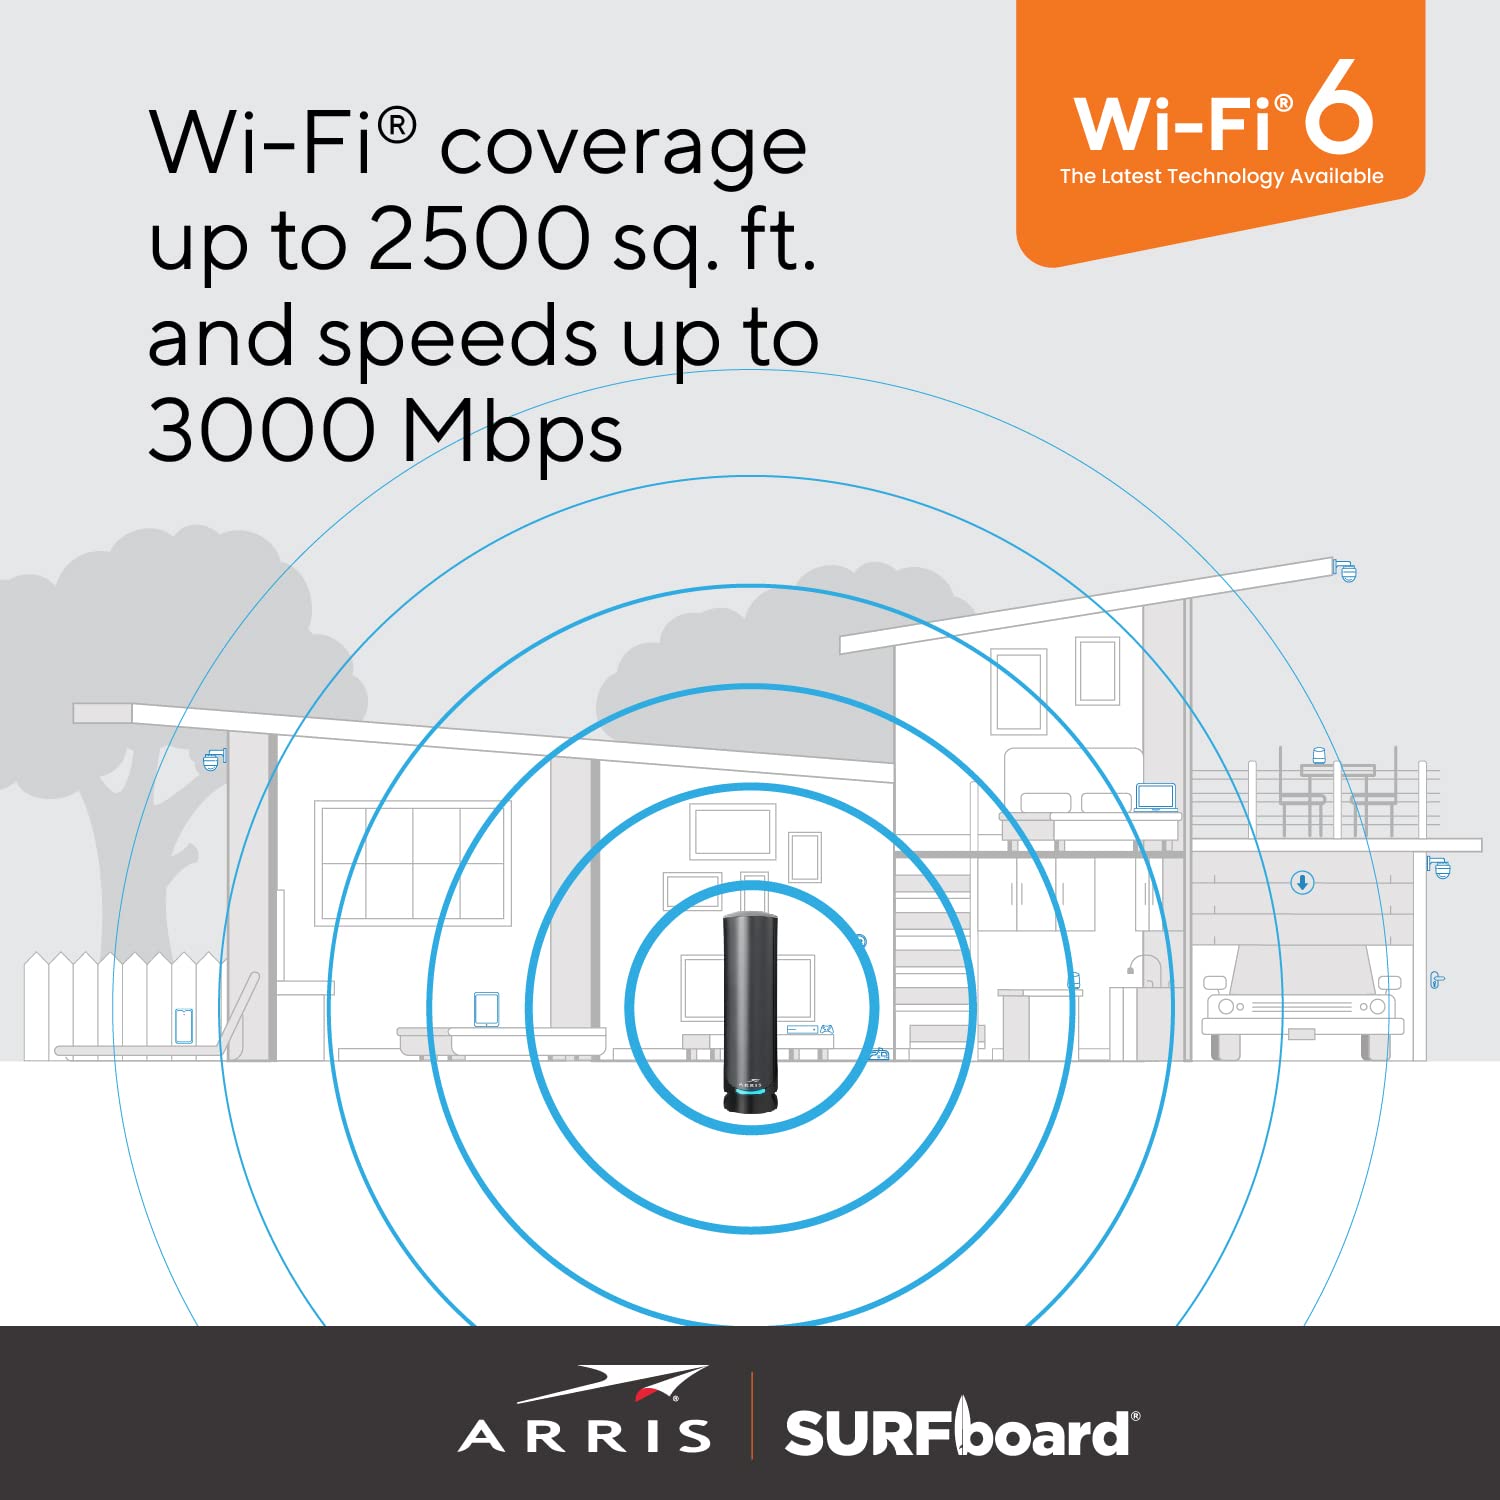 ARRIS Surfboard G36 DOCSIS 3.1 Multi-Gigabit Cable Modem & AX3000 Wi-Fi Router | Comcast Xfinity, Cox, Spectrum| Four 2.5 Gbps Ports | 1.2 Gbps Max Internet Speeds | 4 OFDM Channels | 2 Year Warranty